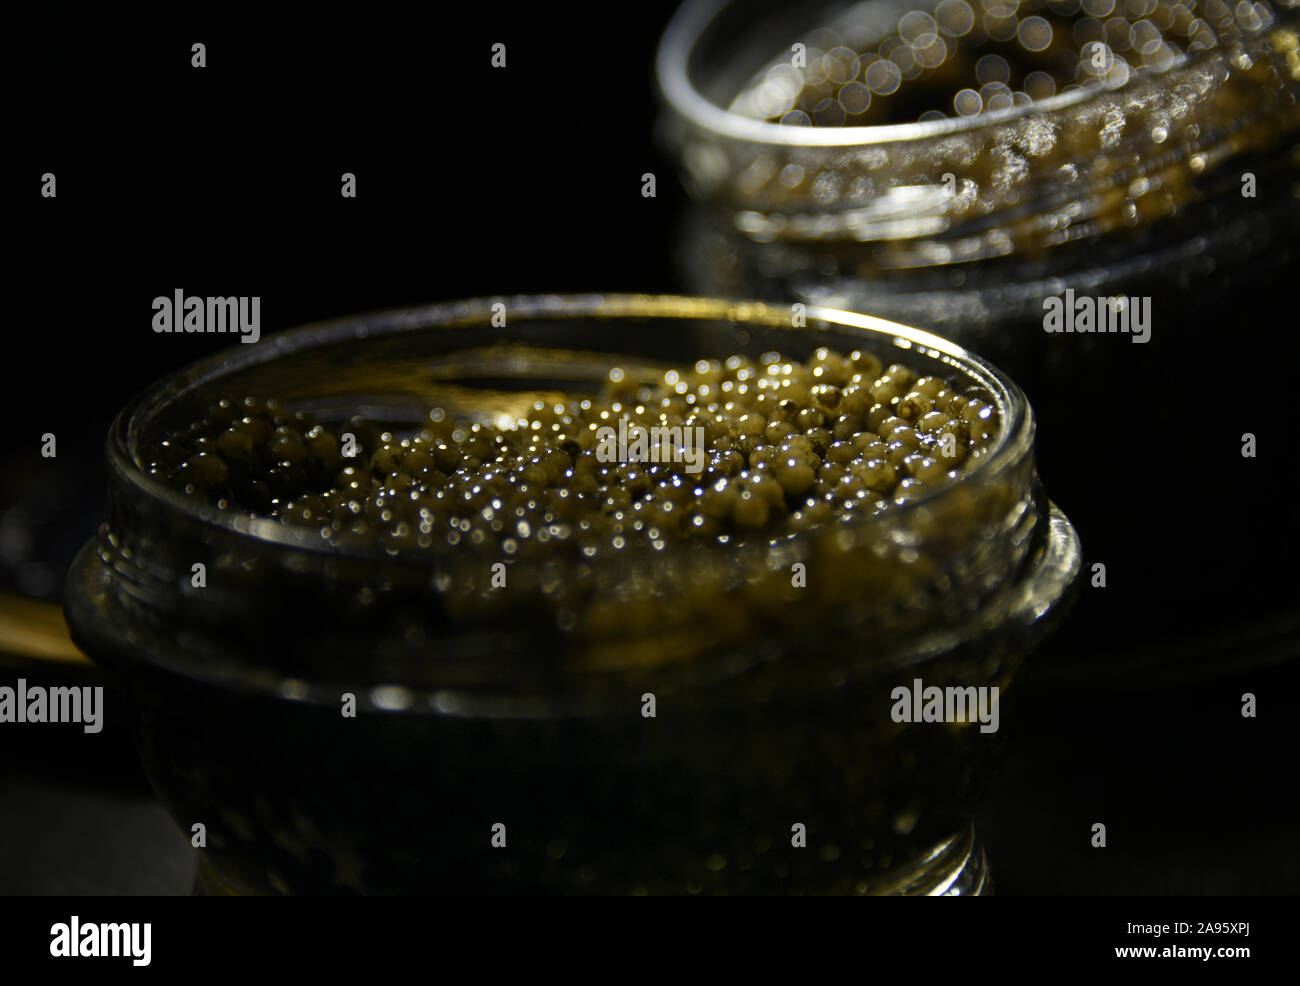 Black caviar in glass cans. Stock Photo